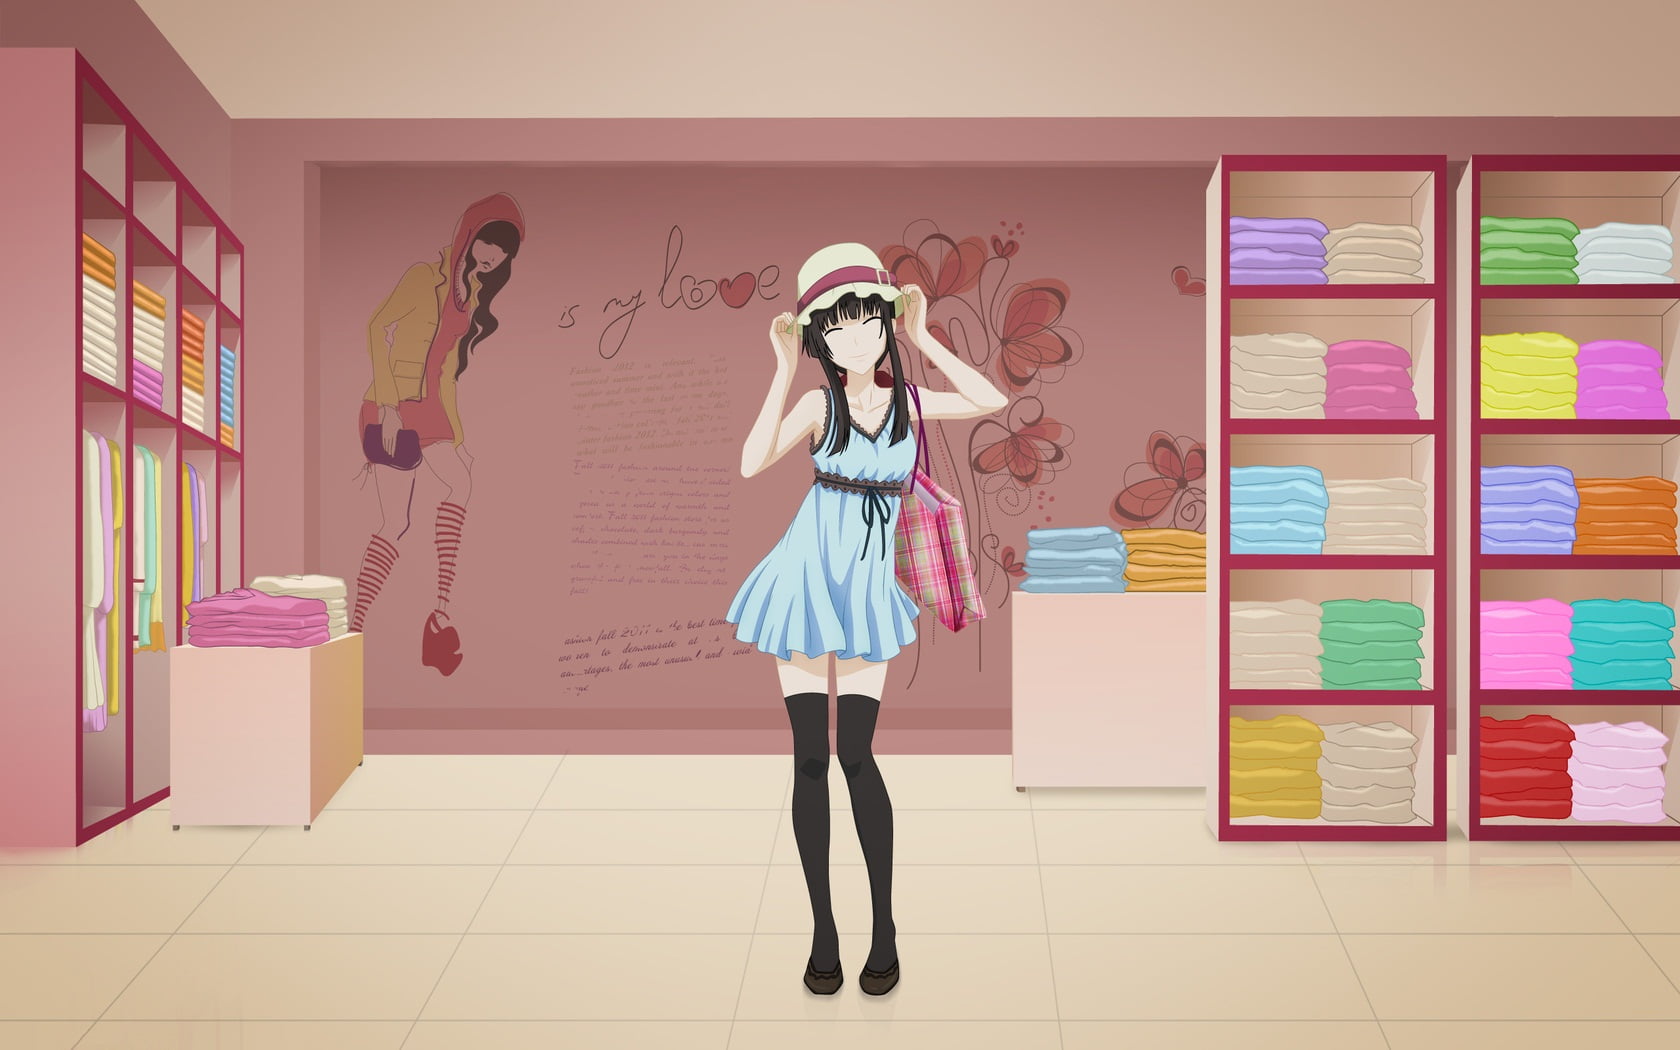 Anime Girl In Clothing Shop, female anime character in gray dress